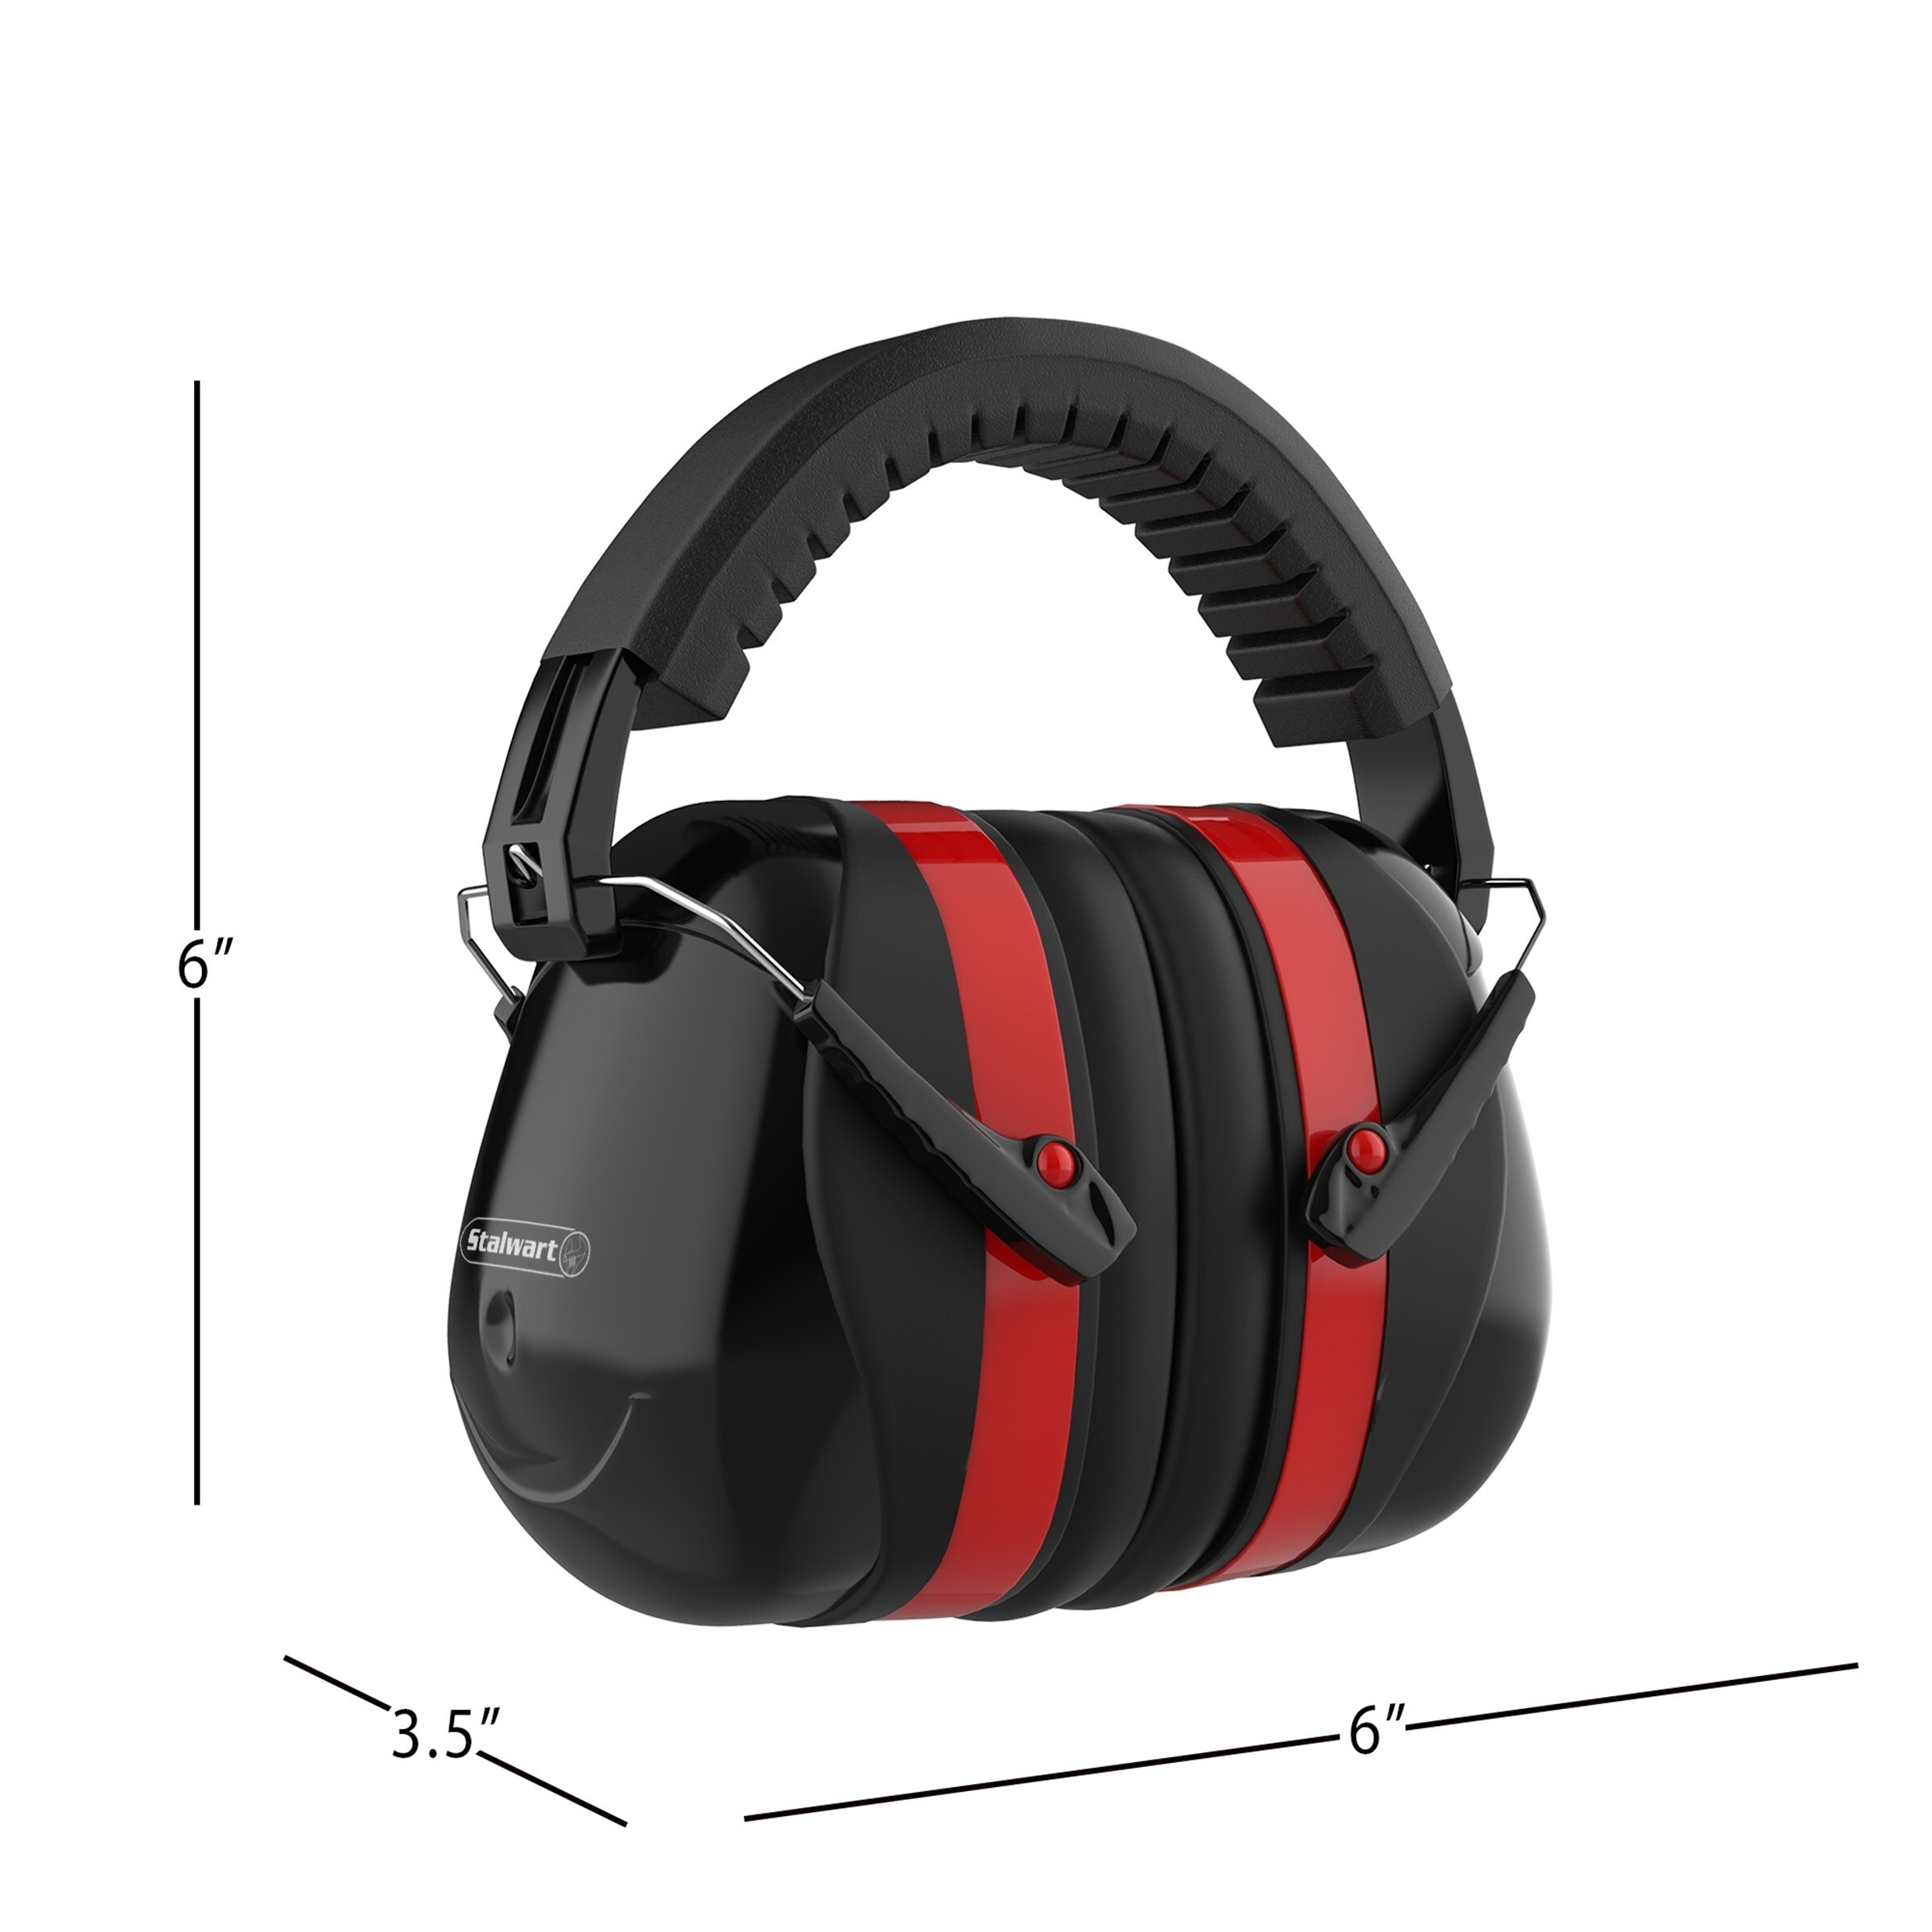 Ear Muffs Foldable 30 Db Noise Reduction Hearing Protection With Adjustable Headband Indoor And Outdoor Work By Stalwart Overstock